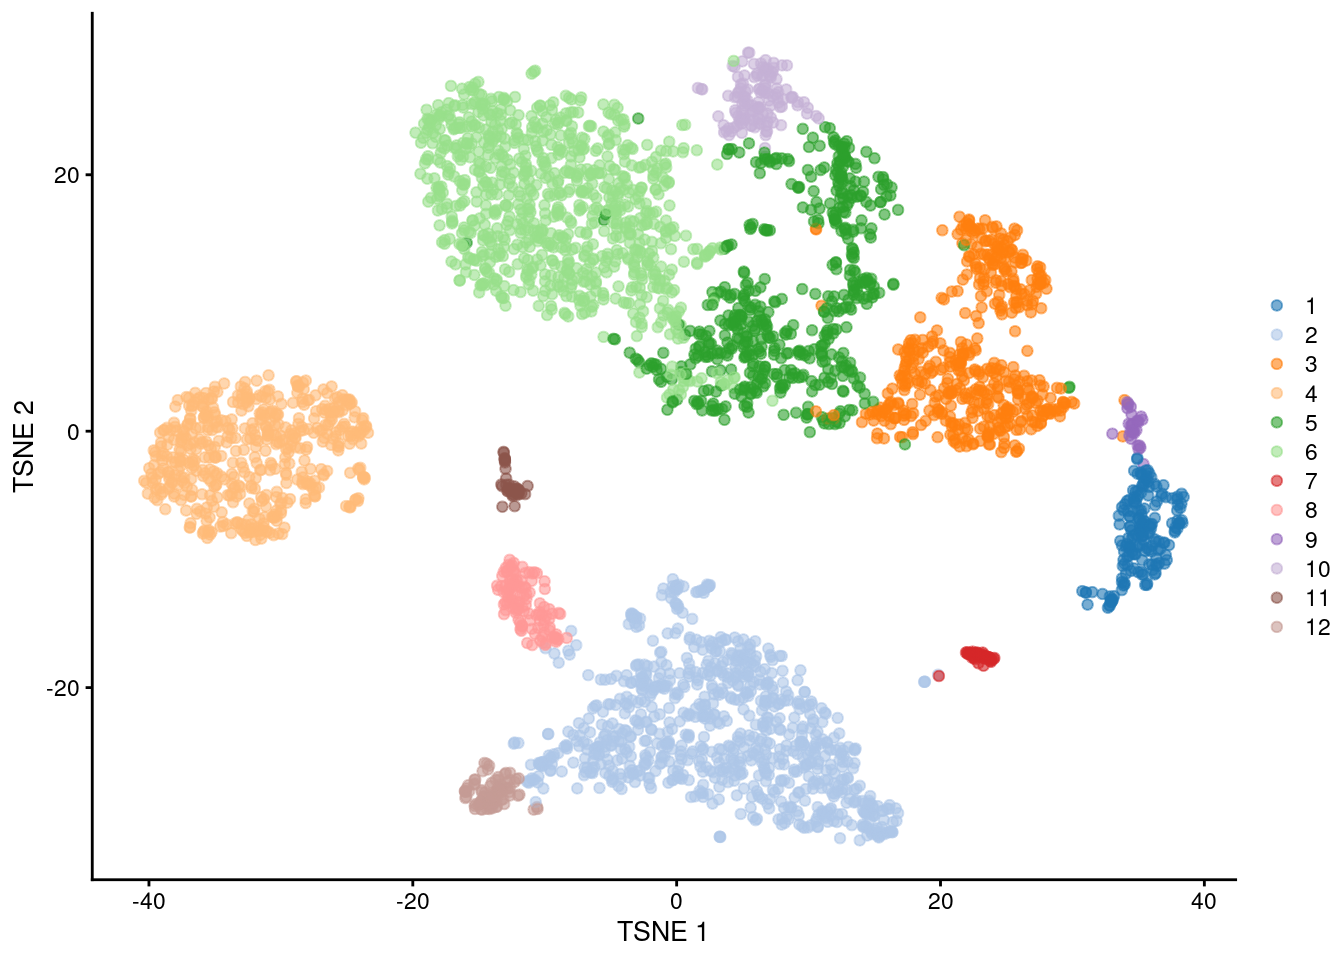 $t$-SNE plot of the PBMC dataset, where each point represents a cell and is coloured according to the identity of the assigned cluster from combined $k$-means/graph-based clustering.